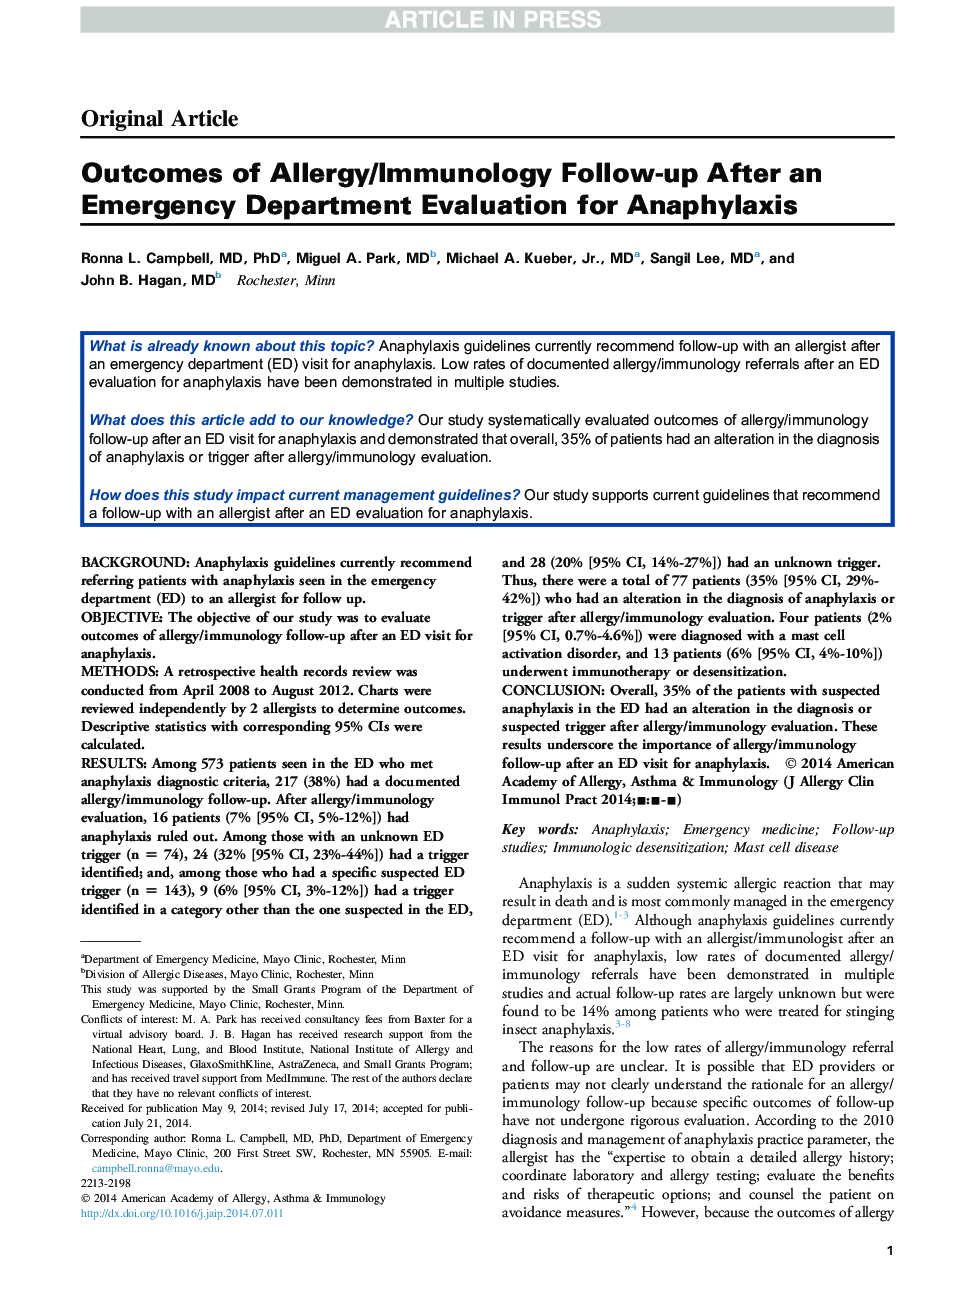 Outcomes of Allergy/Immunology Follow-Up After an Emergency Department Evaluation for Anaphylaxis